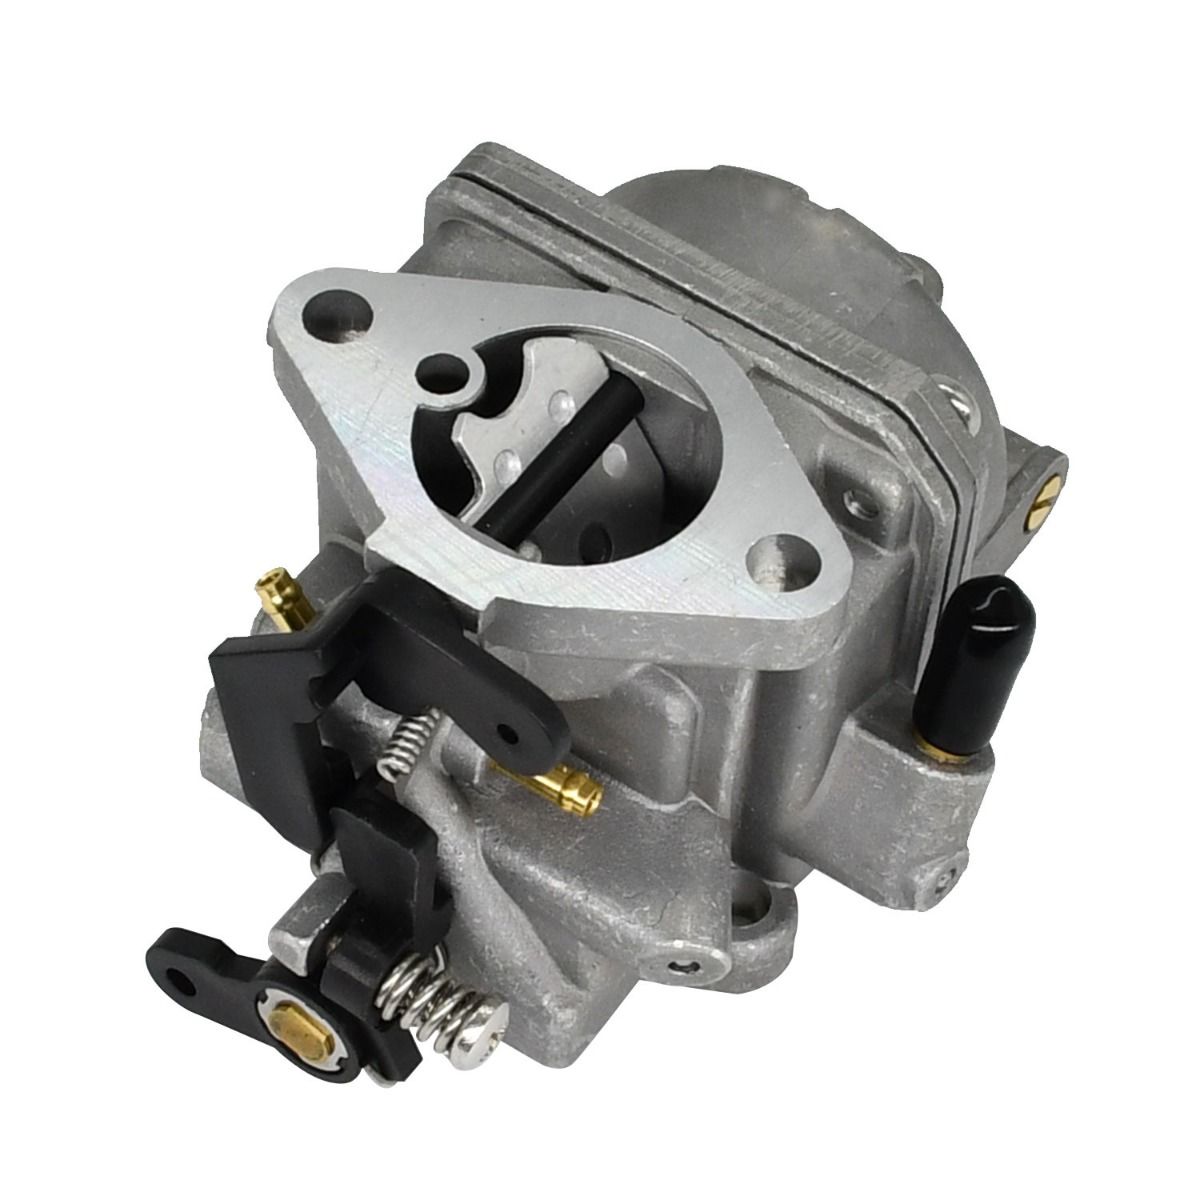 SouthMarine Boat Engine 3303-8M0053668 8M0053669 804766T03 804766A04 804766A05 803522T1 803522T2 Carburetor Carbs Assy for Mercury Mercruiser Quicksilver 4-Stroke 6HP Outboard Motor 